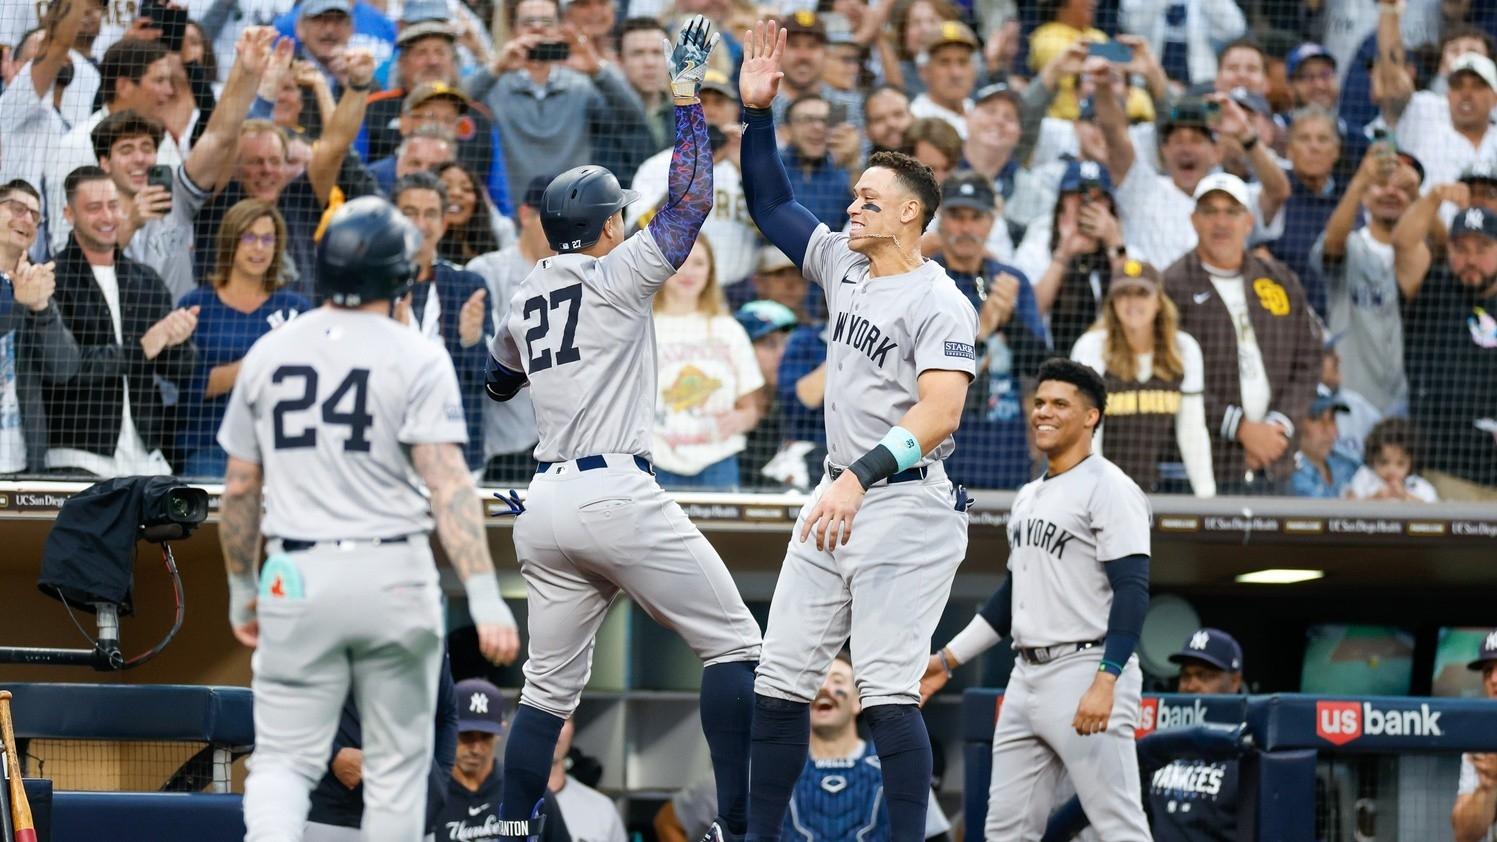 New York Yankees designated hitter Giancarlo Stanton (27) celebrates with New York Yankees center fielder Aaron Judge (99) after hitting a two-run home run in the third inning against the San Diego Padres at Petco Park. / David Frerker-USA TODAY Sports